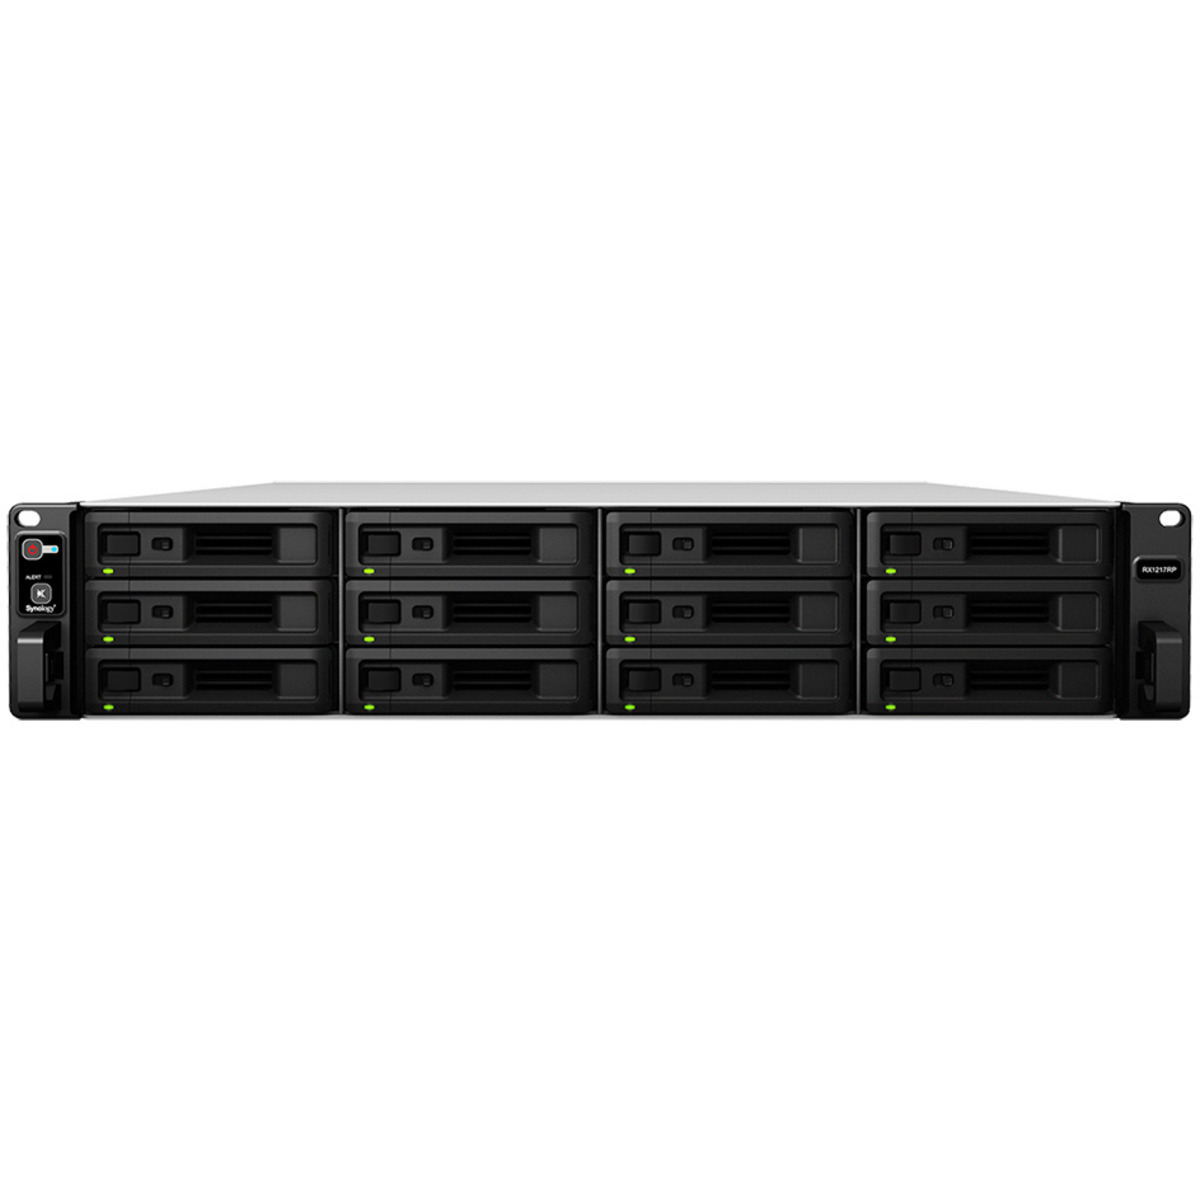 Synology RX1217 External Expansion Drive 16tb 12-Bay RackMount Large Business / Enterprise Expansion Enclosure 8x2tb Western Digital Red SA500 WDS200T1R0A 2.5 560/530MB/s SATA 6Gb/s SSD NAS Class Drives Installed - Burn-In Tested RX1217 External Expansion Drive